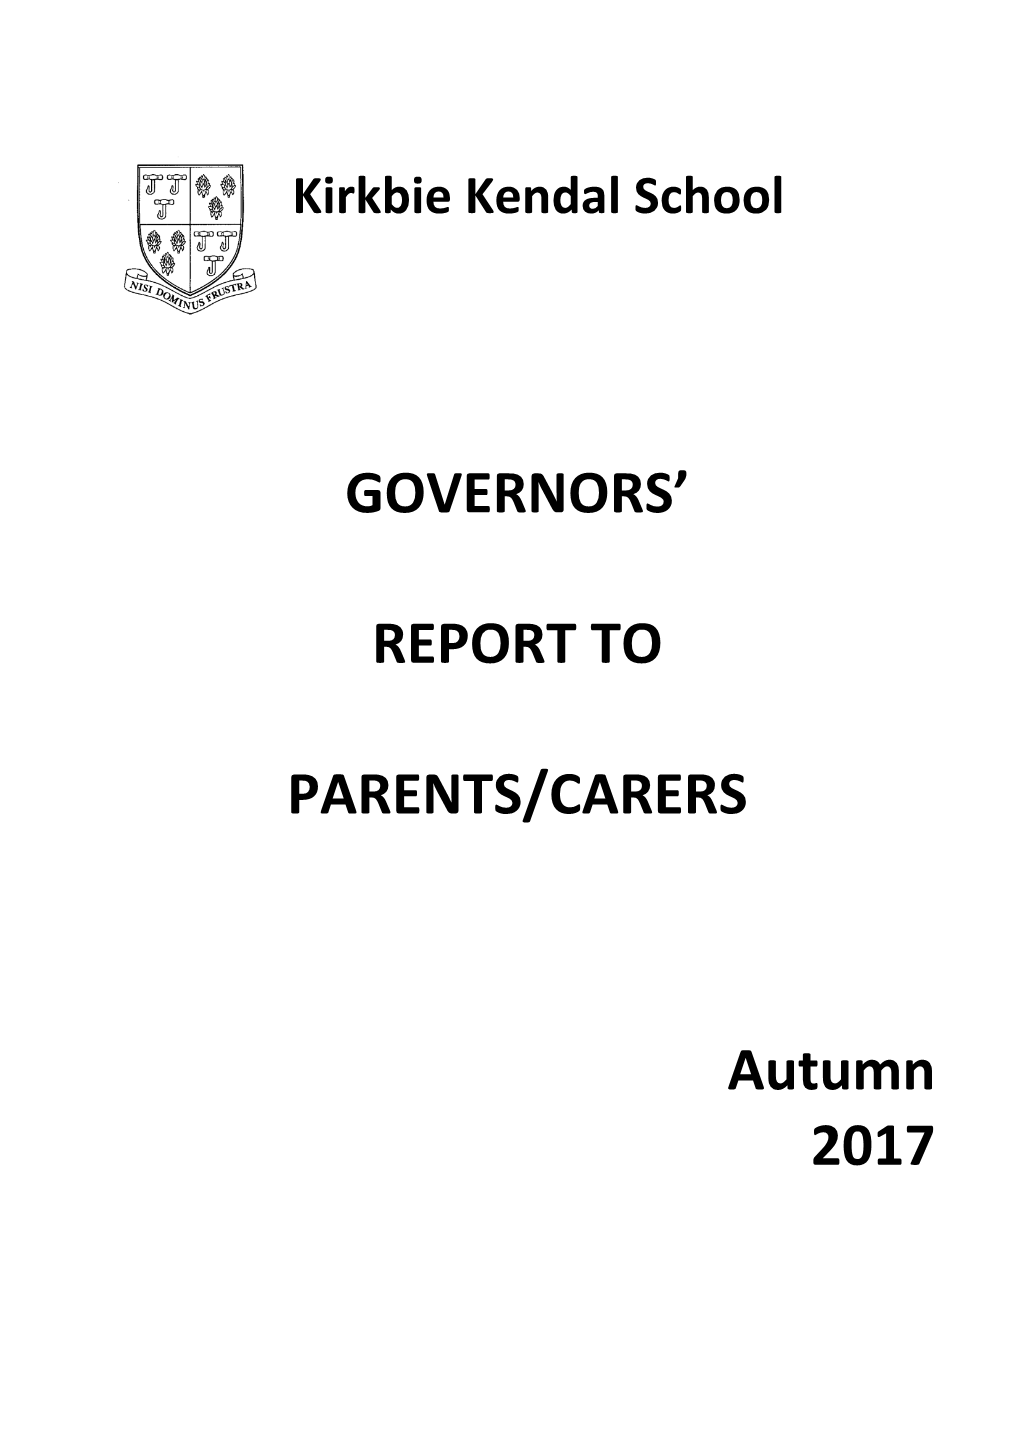 GOVERNORS' REPORT to PARENTS/CARERS Autumn 2017